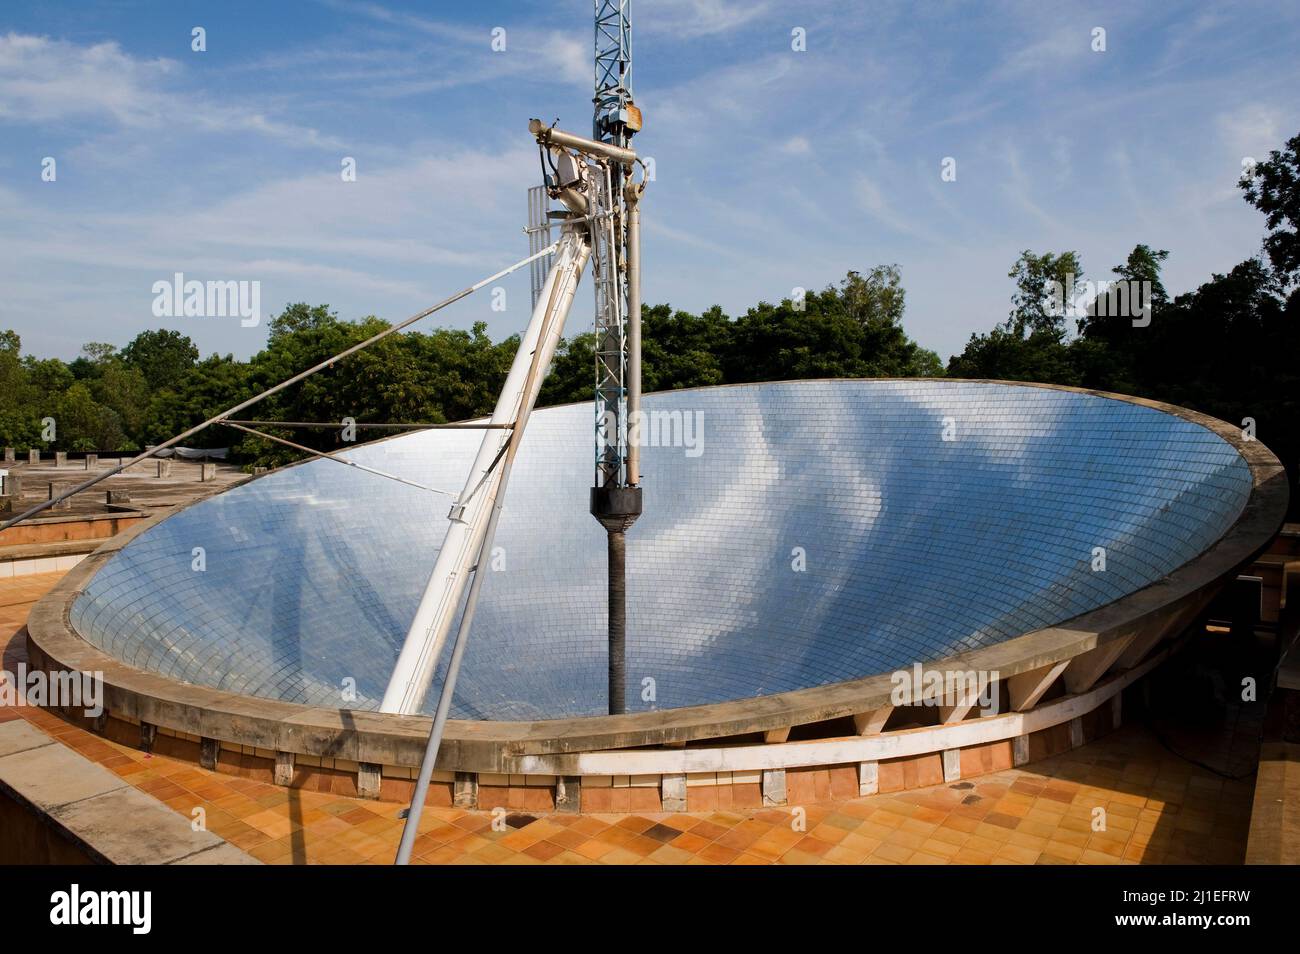 Auroville, India - August 2016: The Solar Bowl of the Solar Kitchen. It is 18 meters wide and helps to prepare lunch for more than 1000 meals per day. Stock Photo